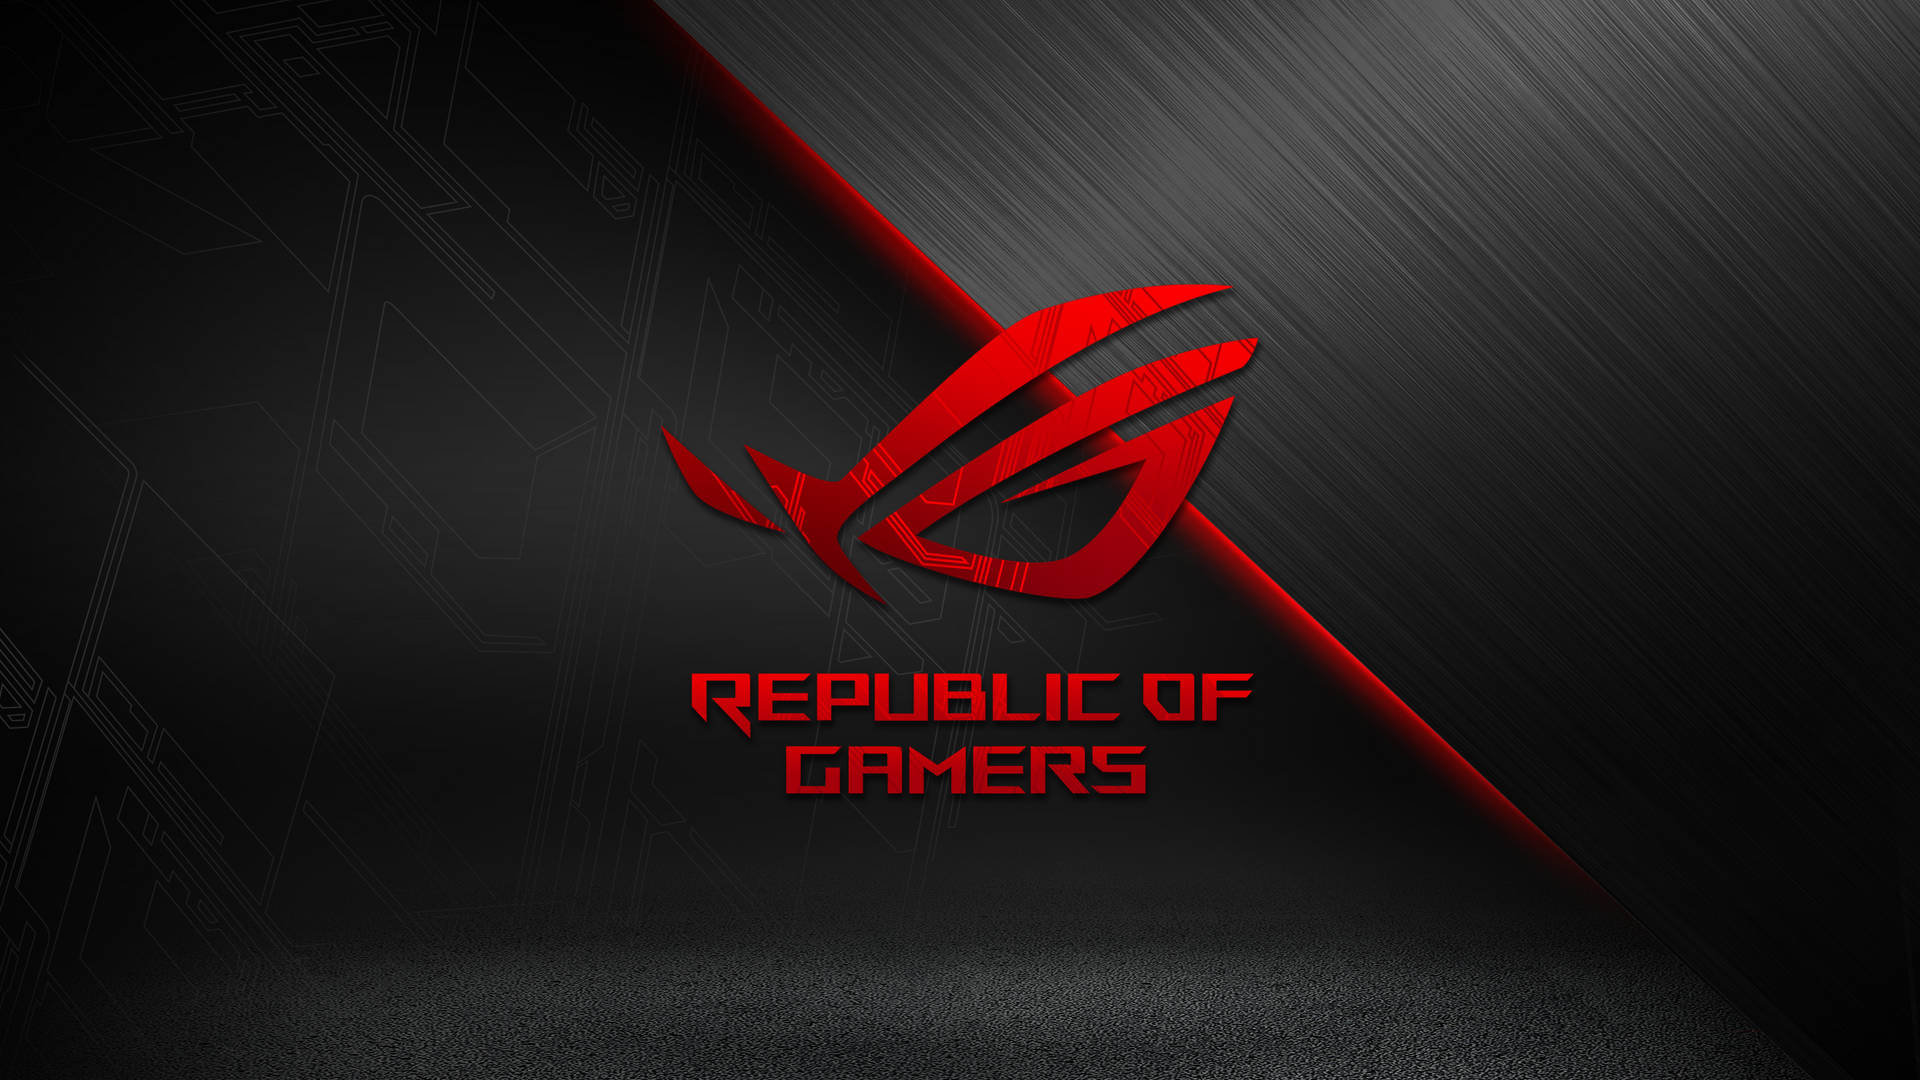 Asus Rog Symbol And Text Background